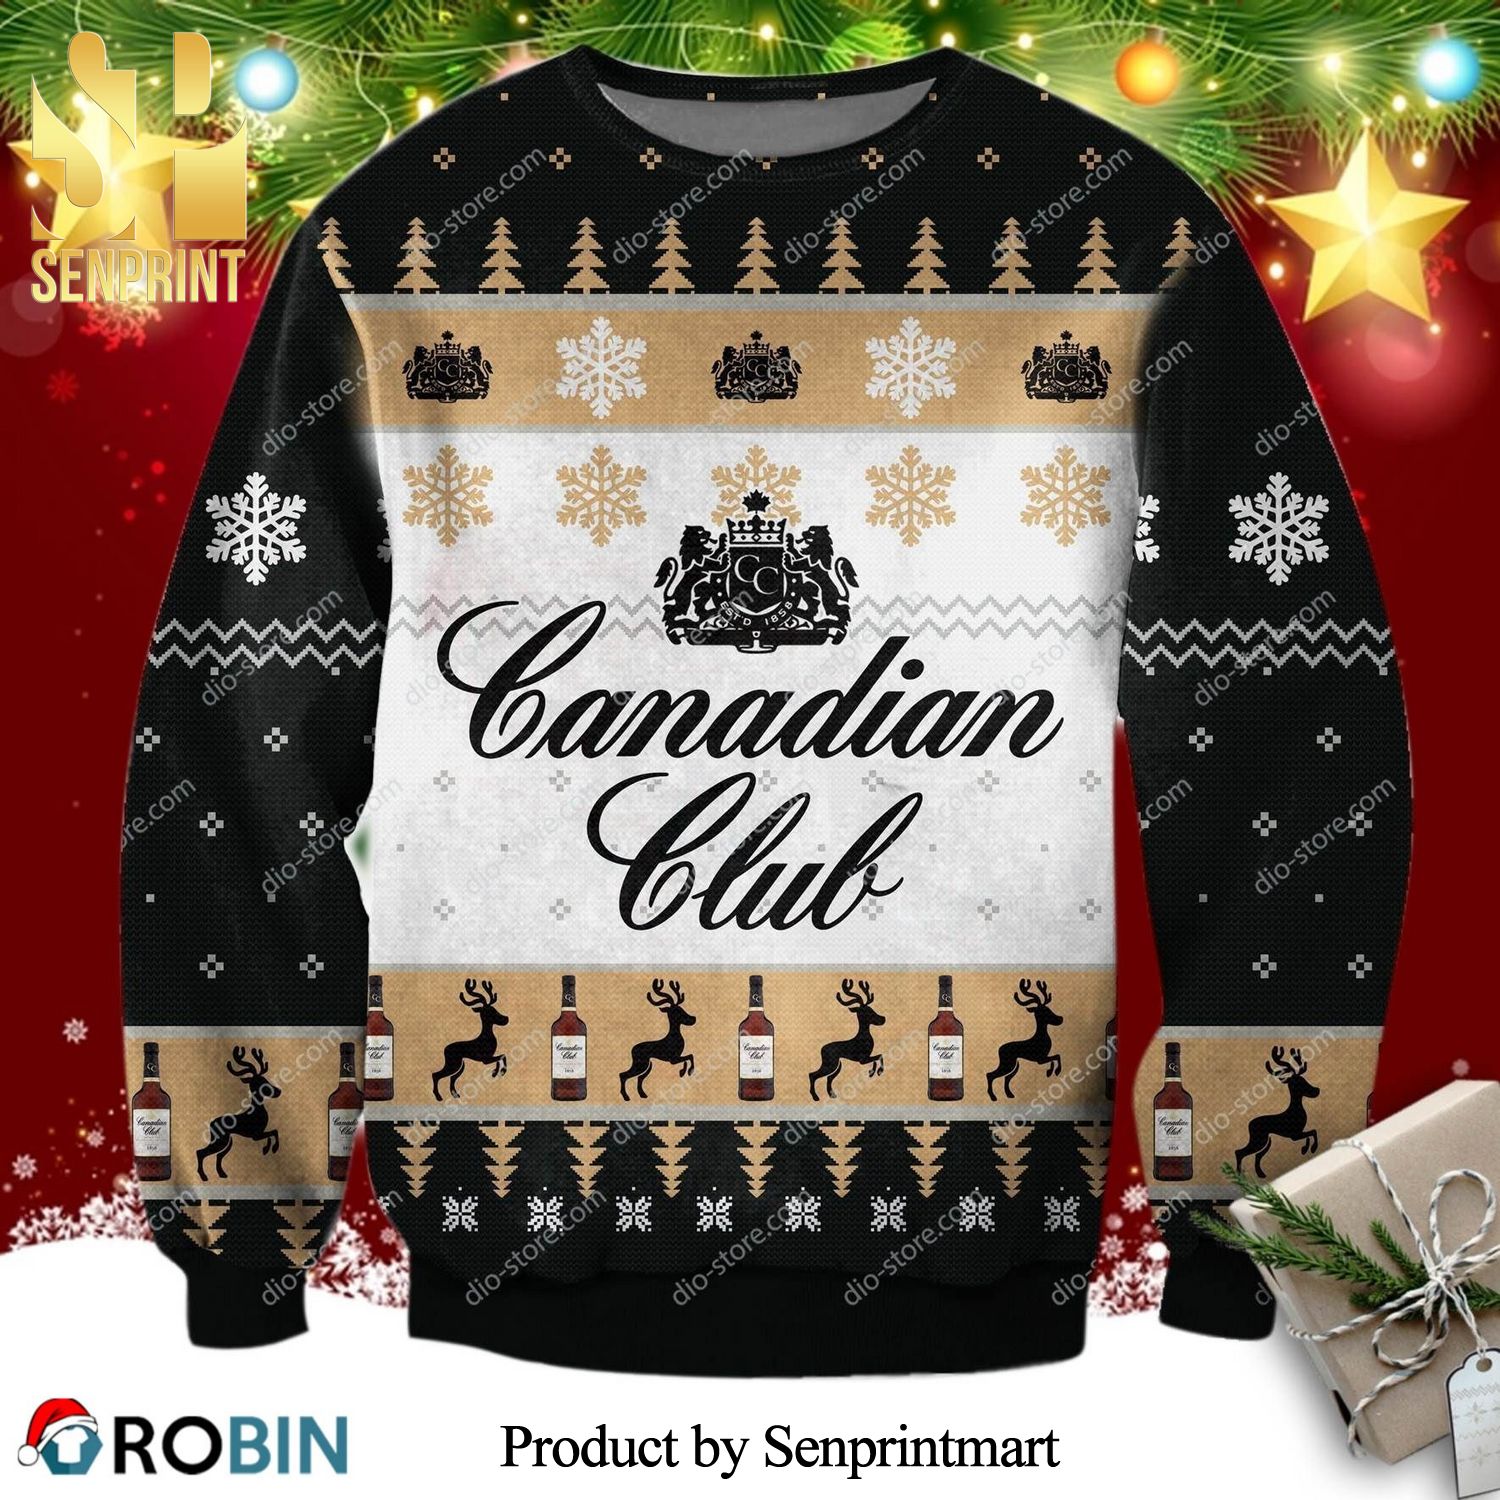 Canadian Club Knitted Ugly Christmas Sweater